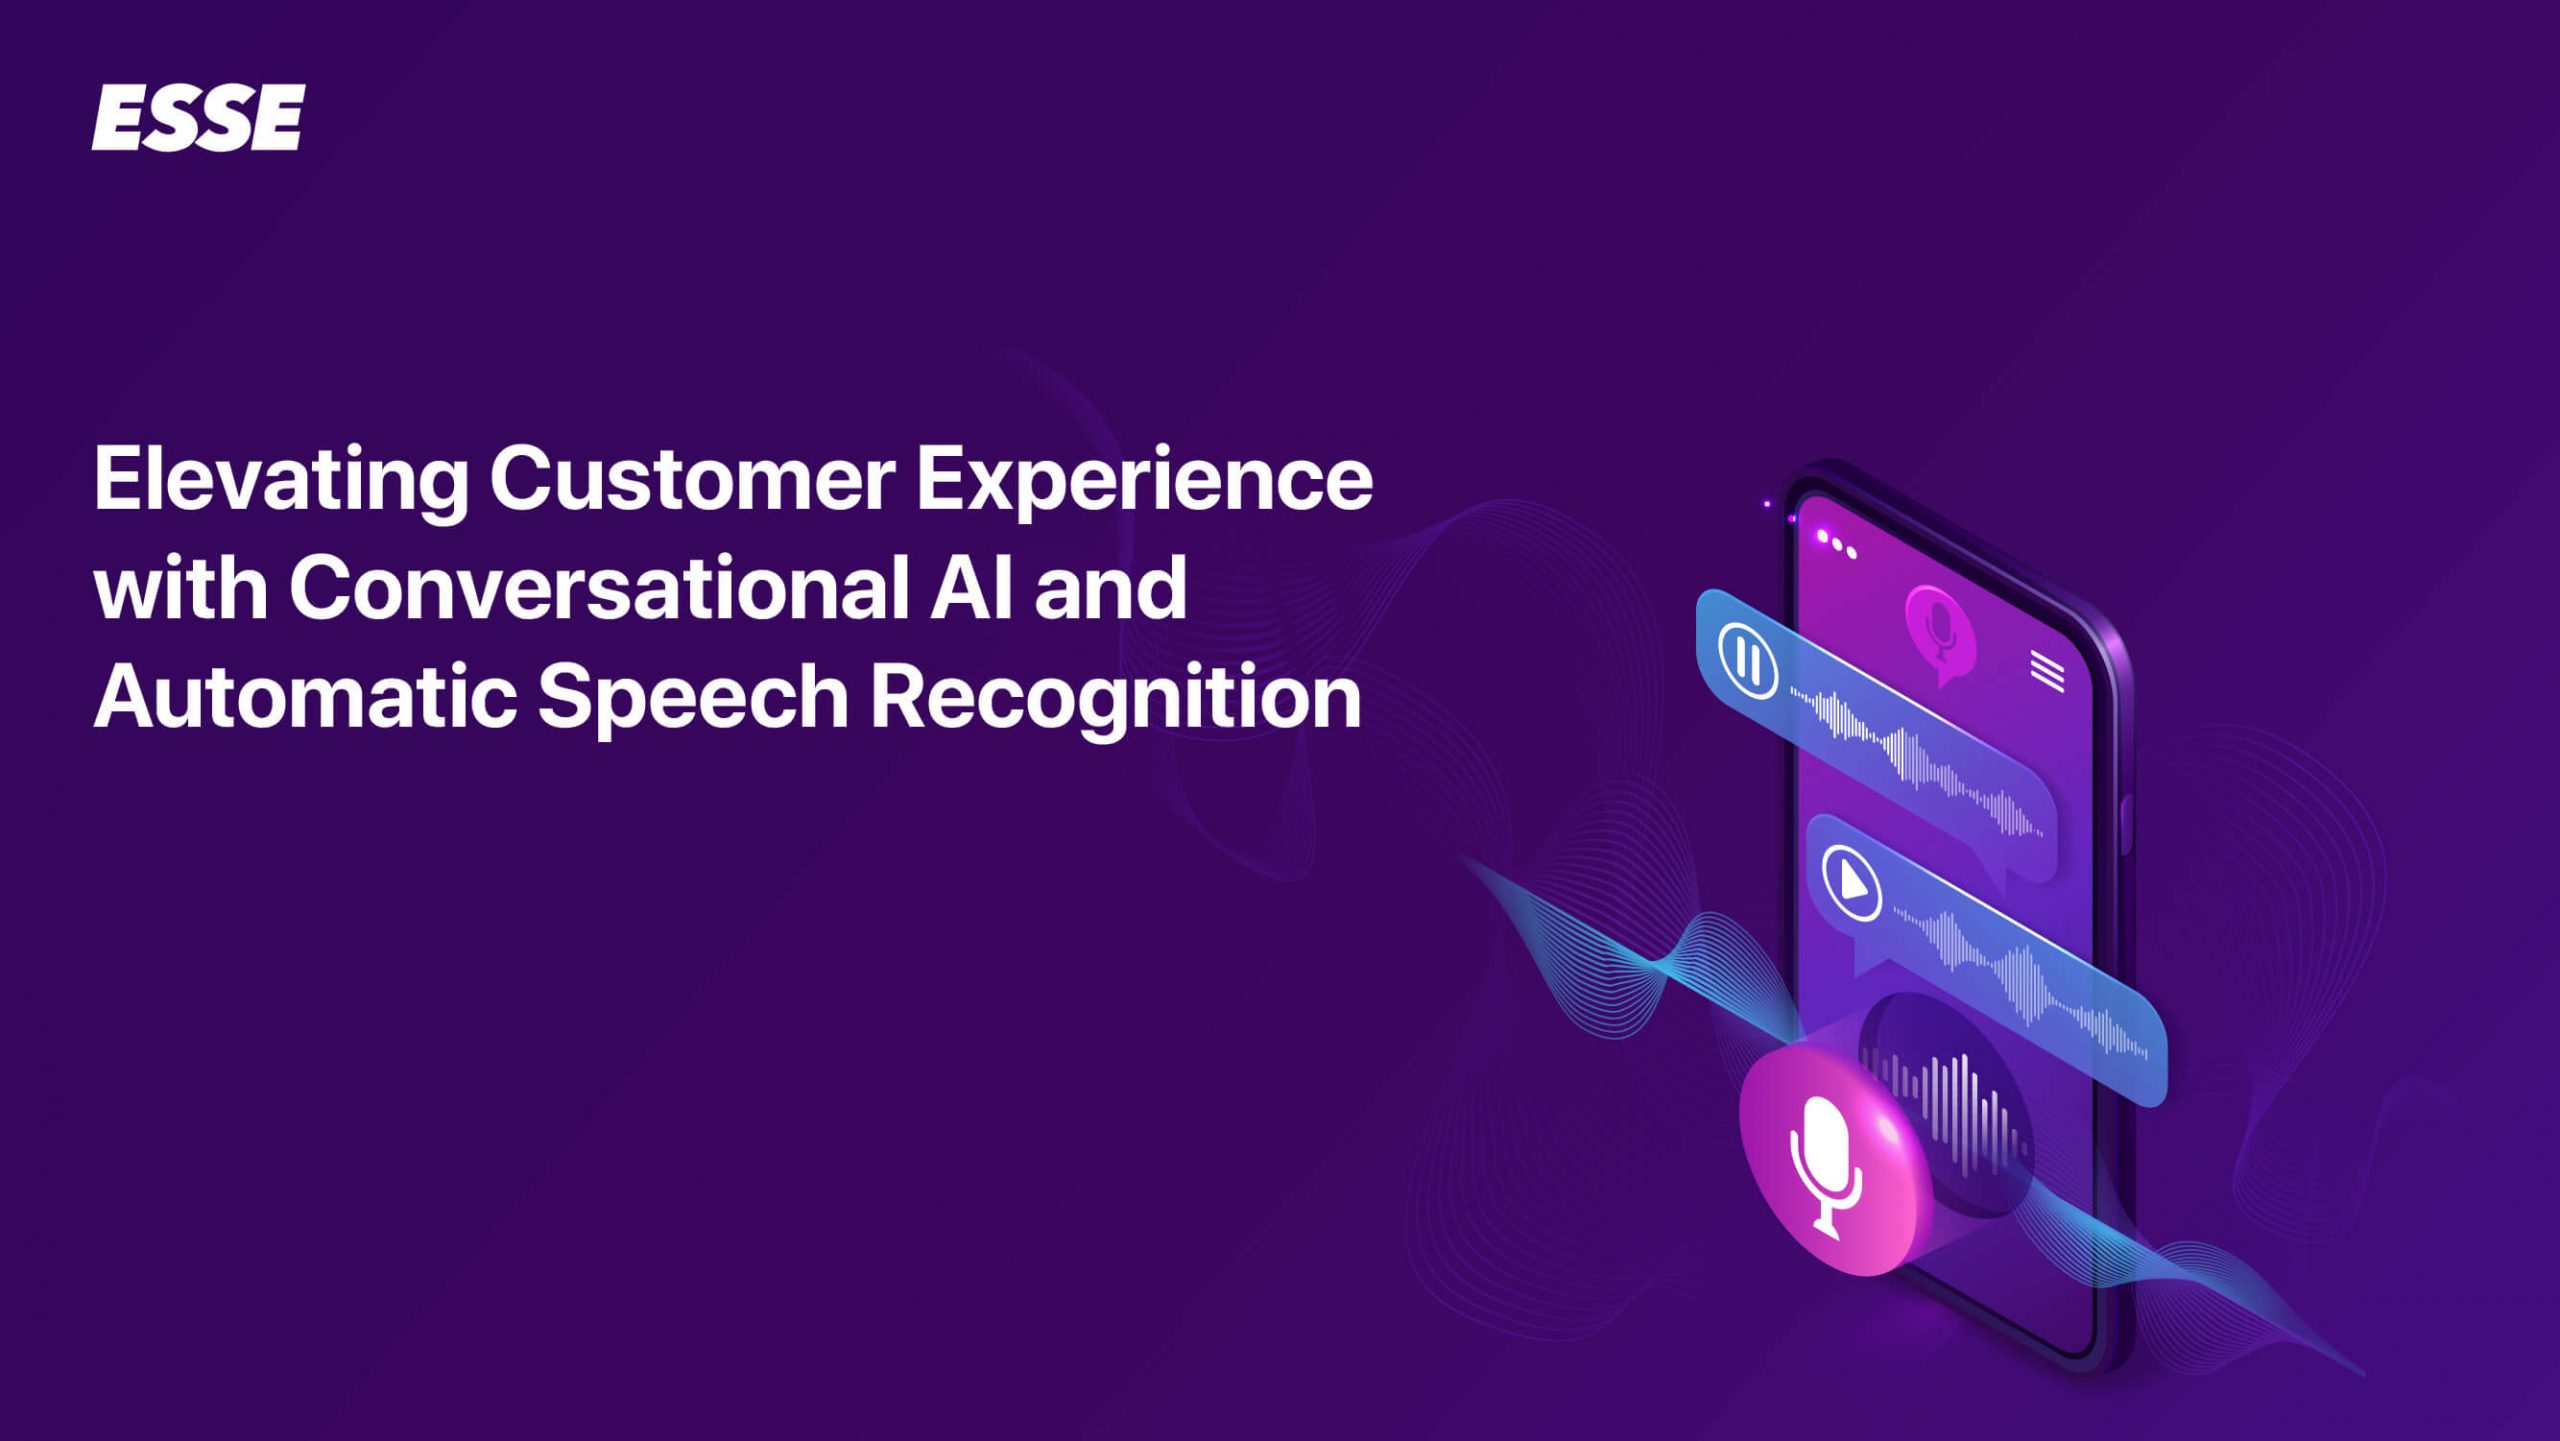 Elevating Customer Experience with Conversational AI and Automatic Speech Recognition